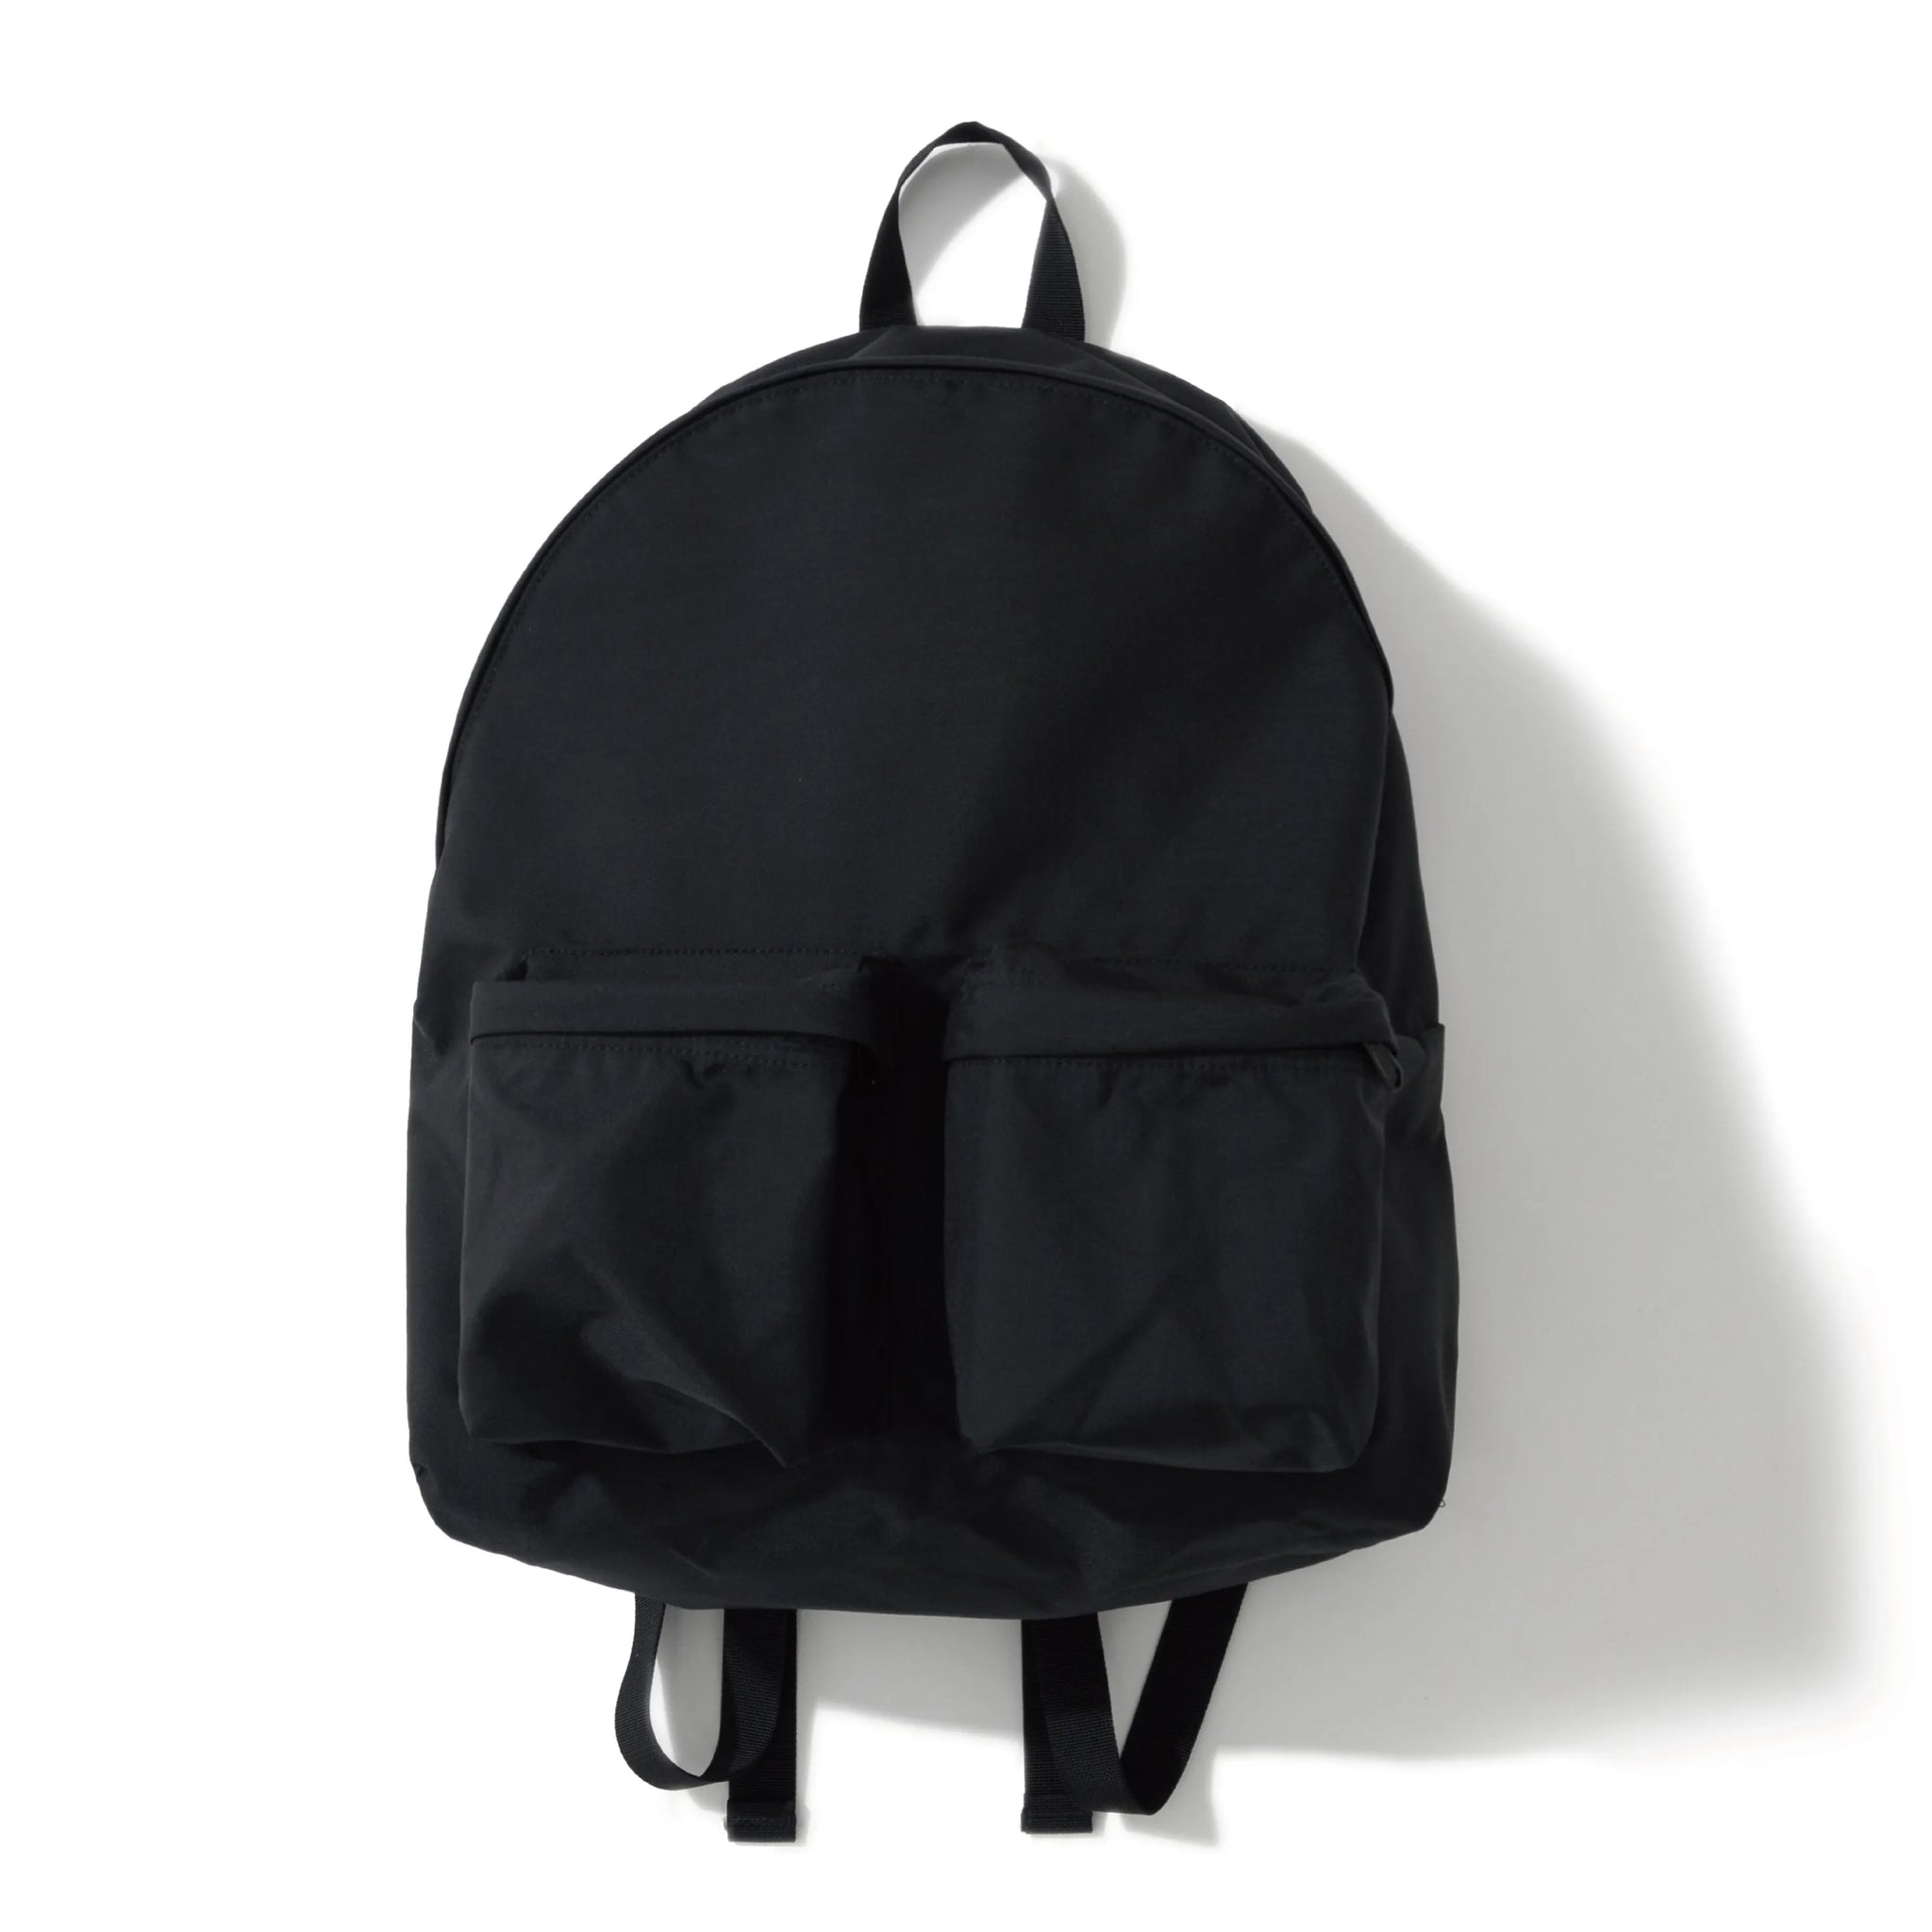 In—*Here Tech Backpack 2.0